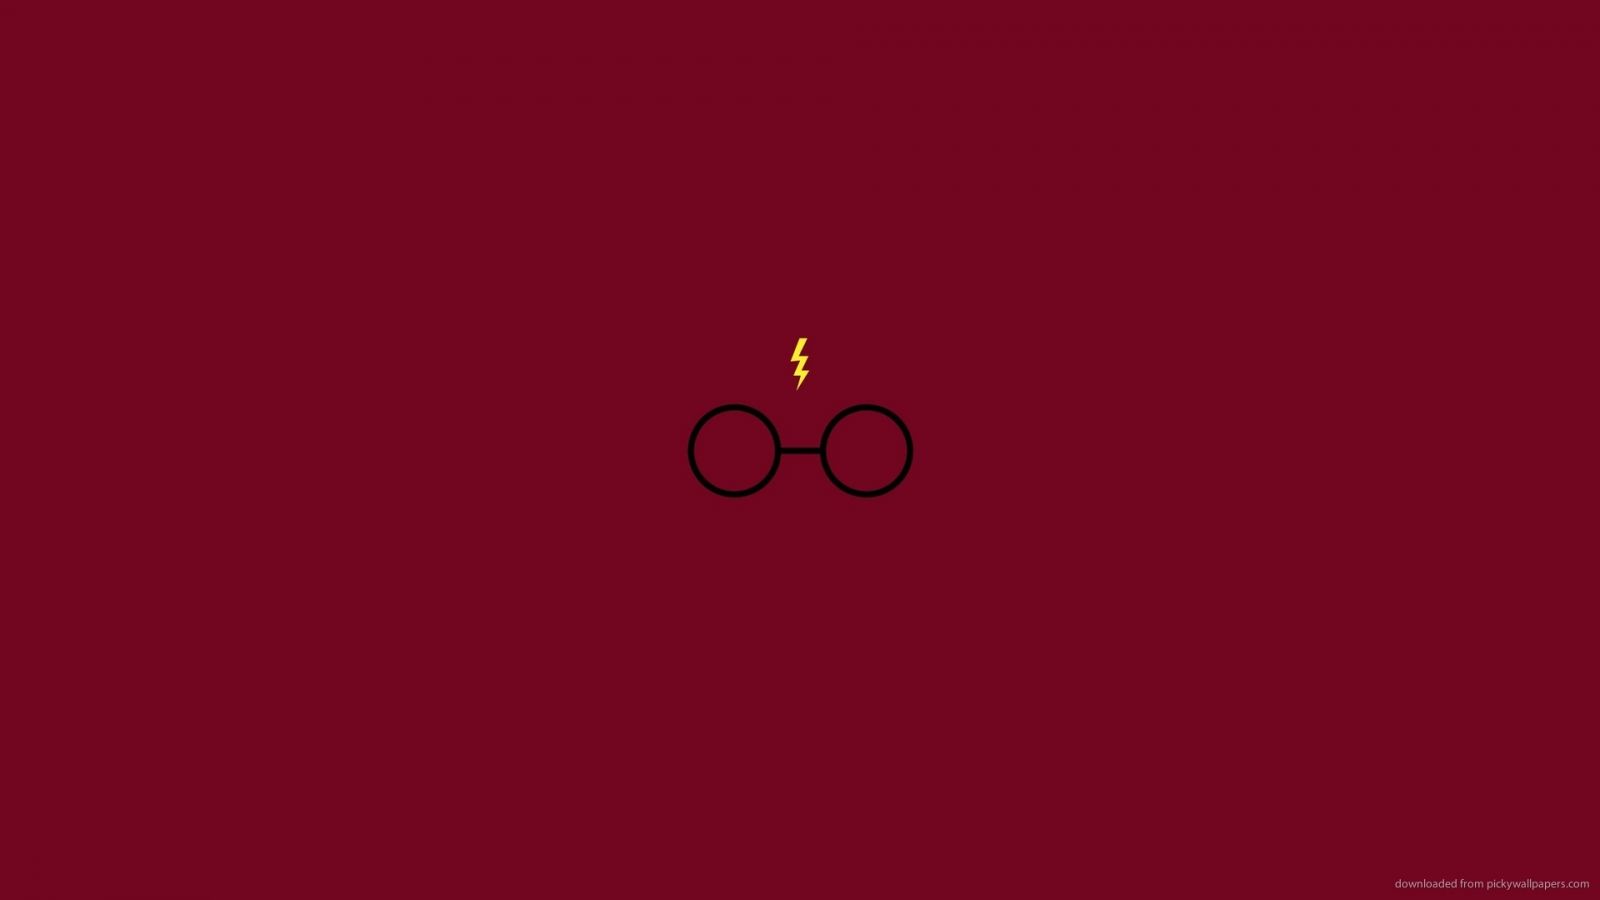 Free download Minimalistic Harry Potter Wallpaper For iPhone 4